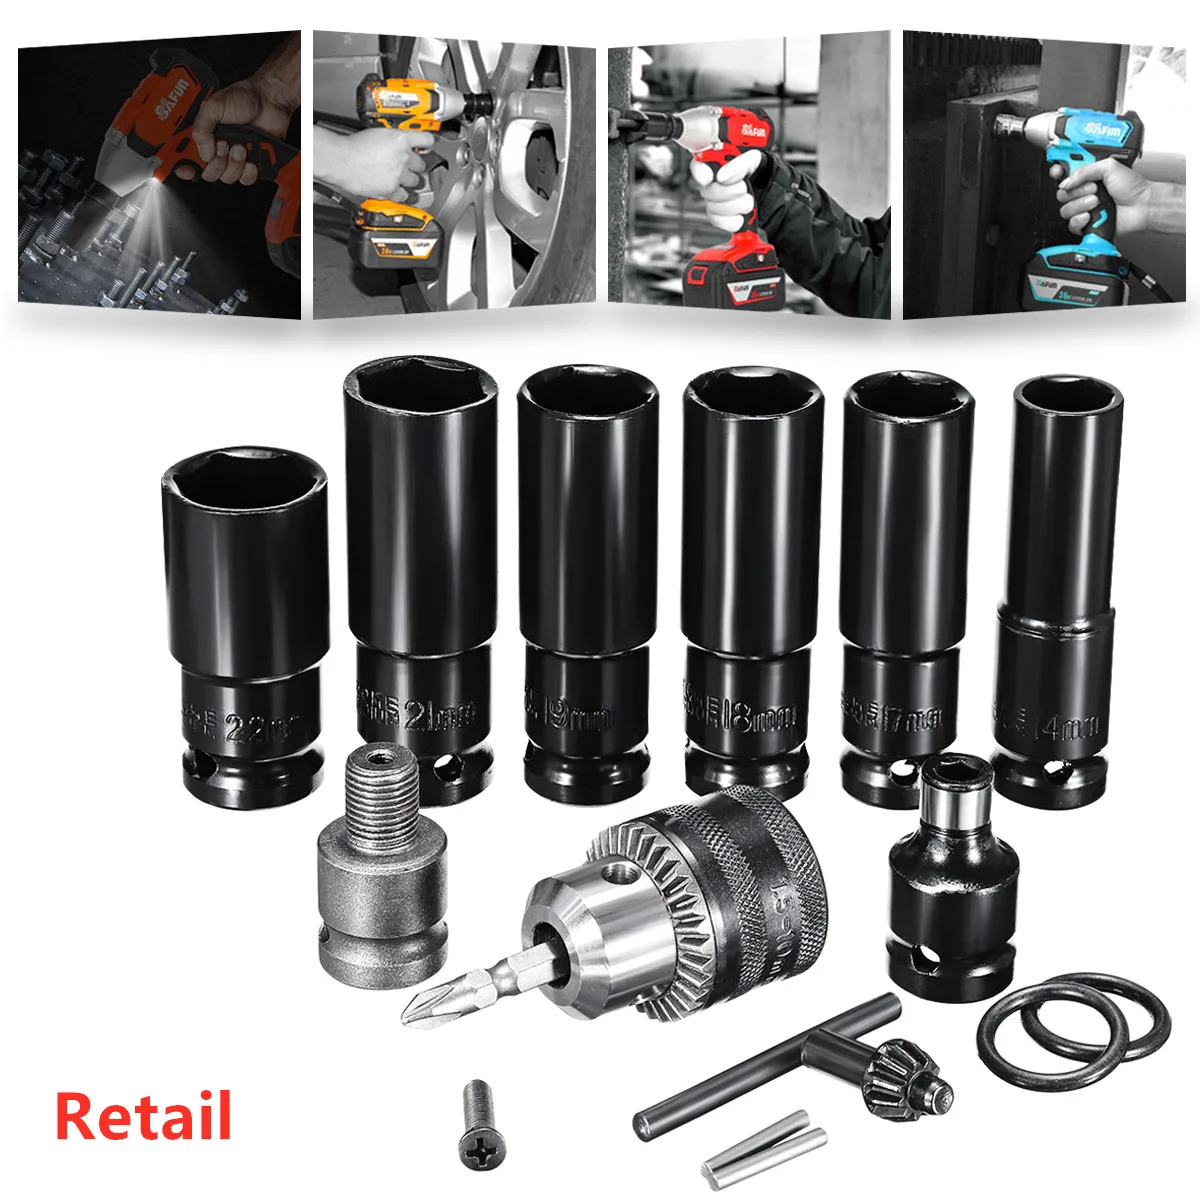 10pcs 14-22mm Electric Impact Wrench Hexs Socket Head Set Kit Drill Chuck Drive Adapter SET for Electric Drill Wrench Screwdrive